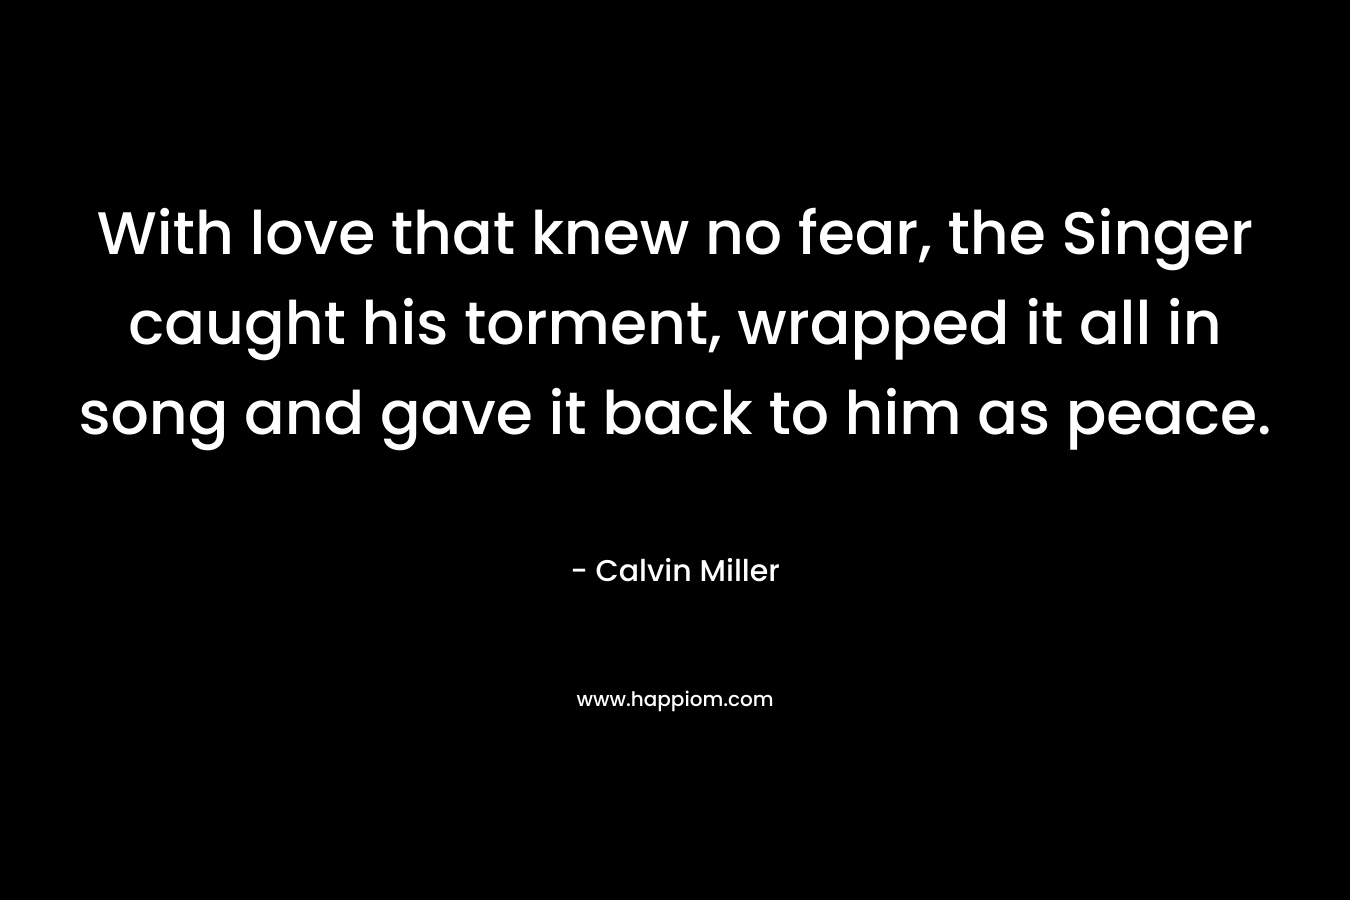 With love that knew no fear, the Singer caught his torment, wrapped it all in song and gave it back to him as peace. – Calvin Miller